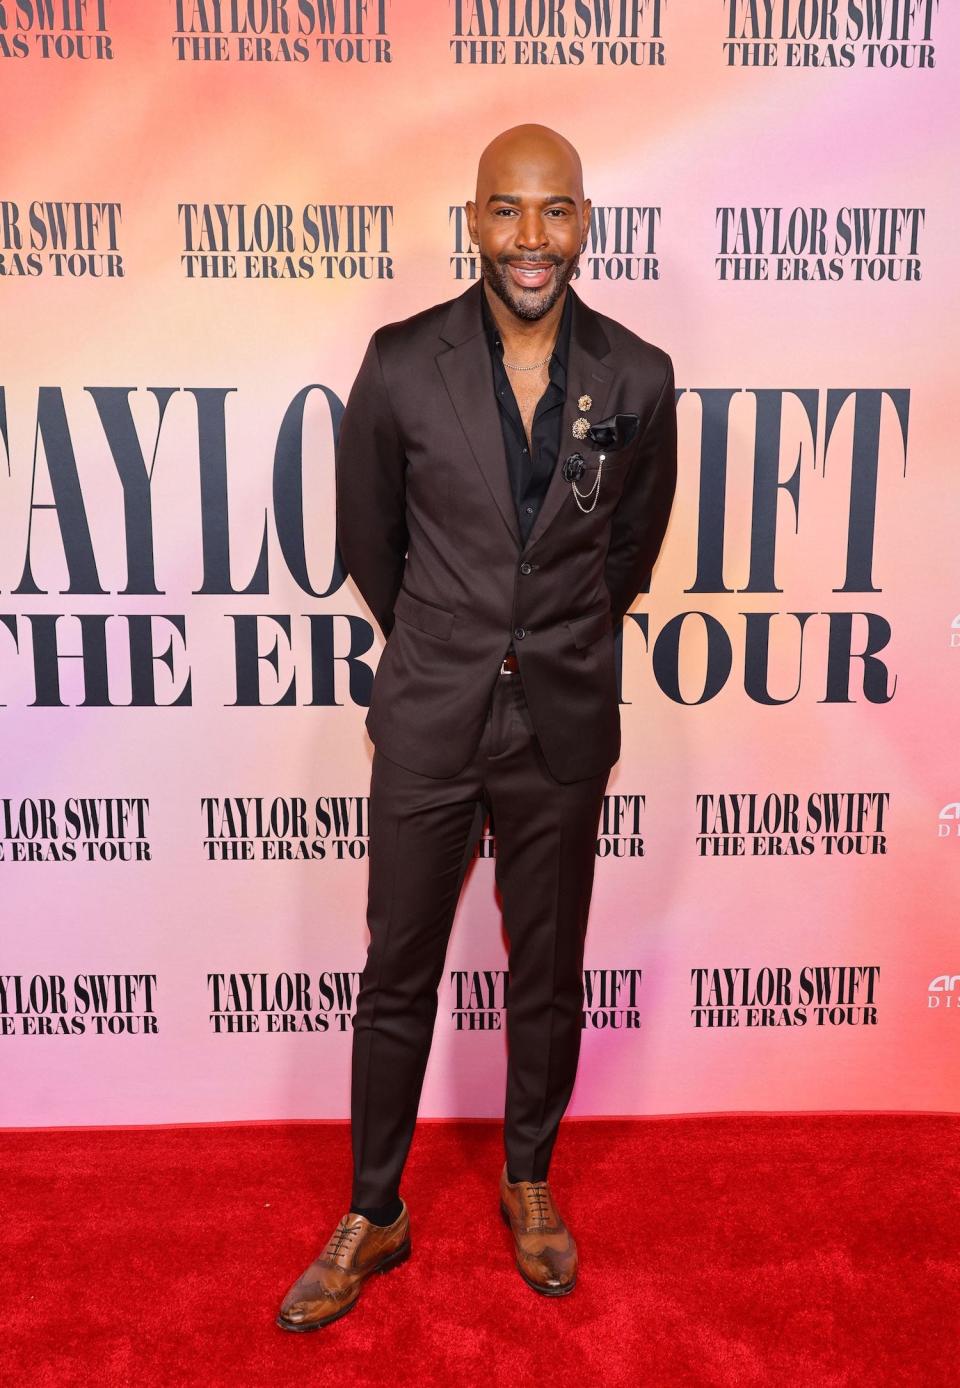 Karamo Brown attends "Taylor Swift: The Eras Tour" Concert Movie World Premiere on October 11, 2023 in Los Angeles, California.